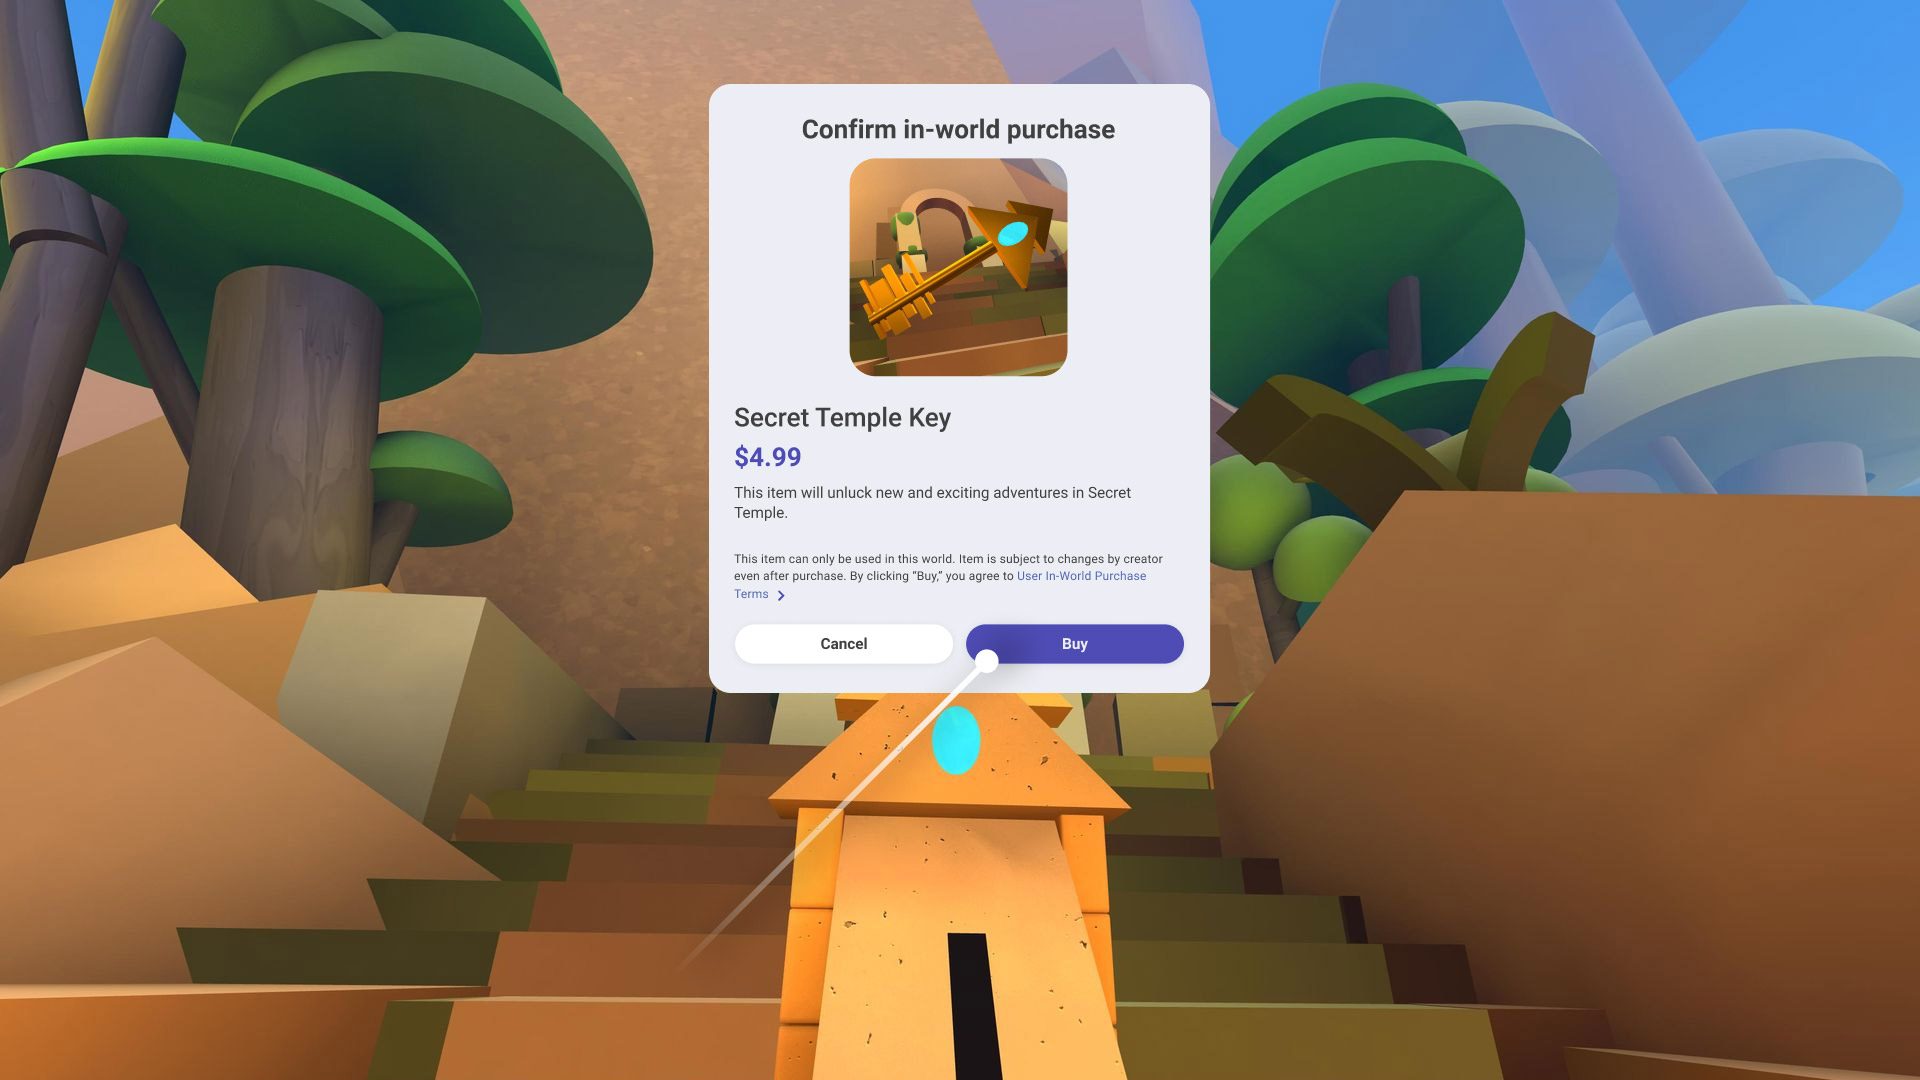 I hate the new design of Roblox's Creator Marketplace and the fact